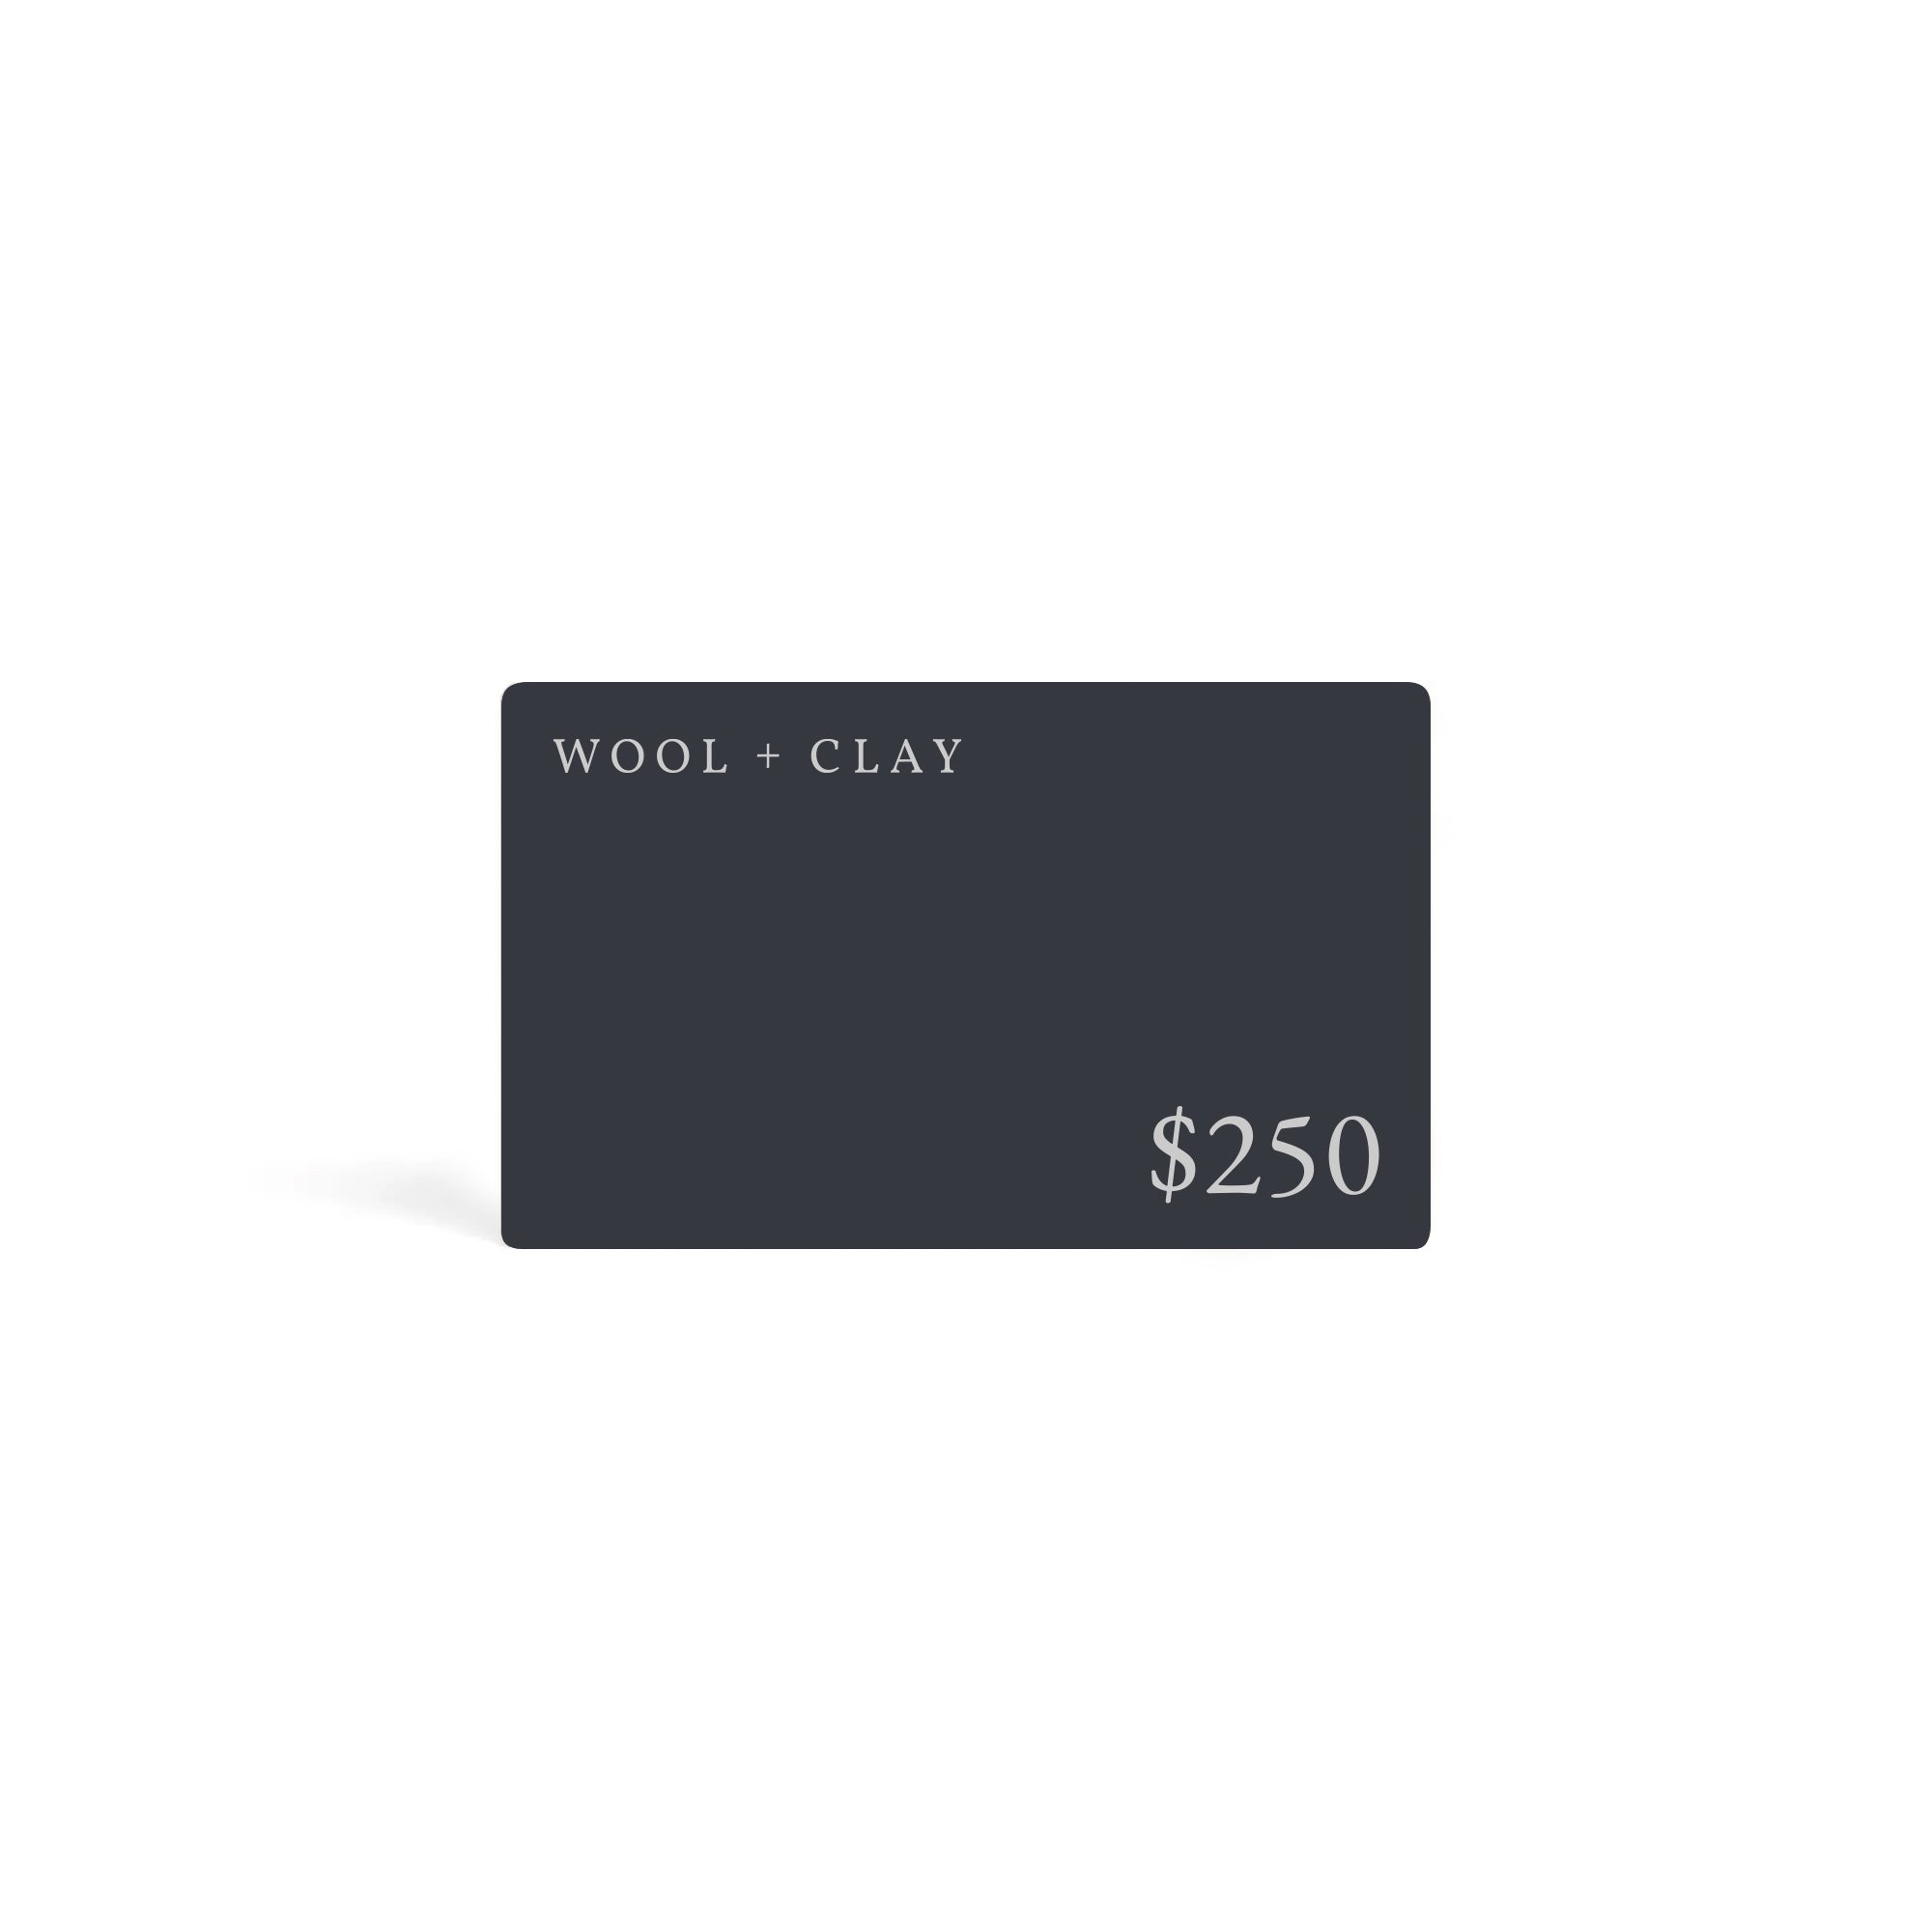 Wool+Clay Gift Card by Wool+Clay - Wool+Clay